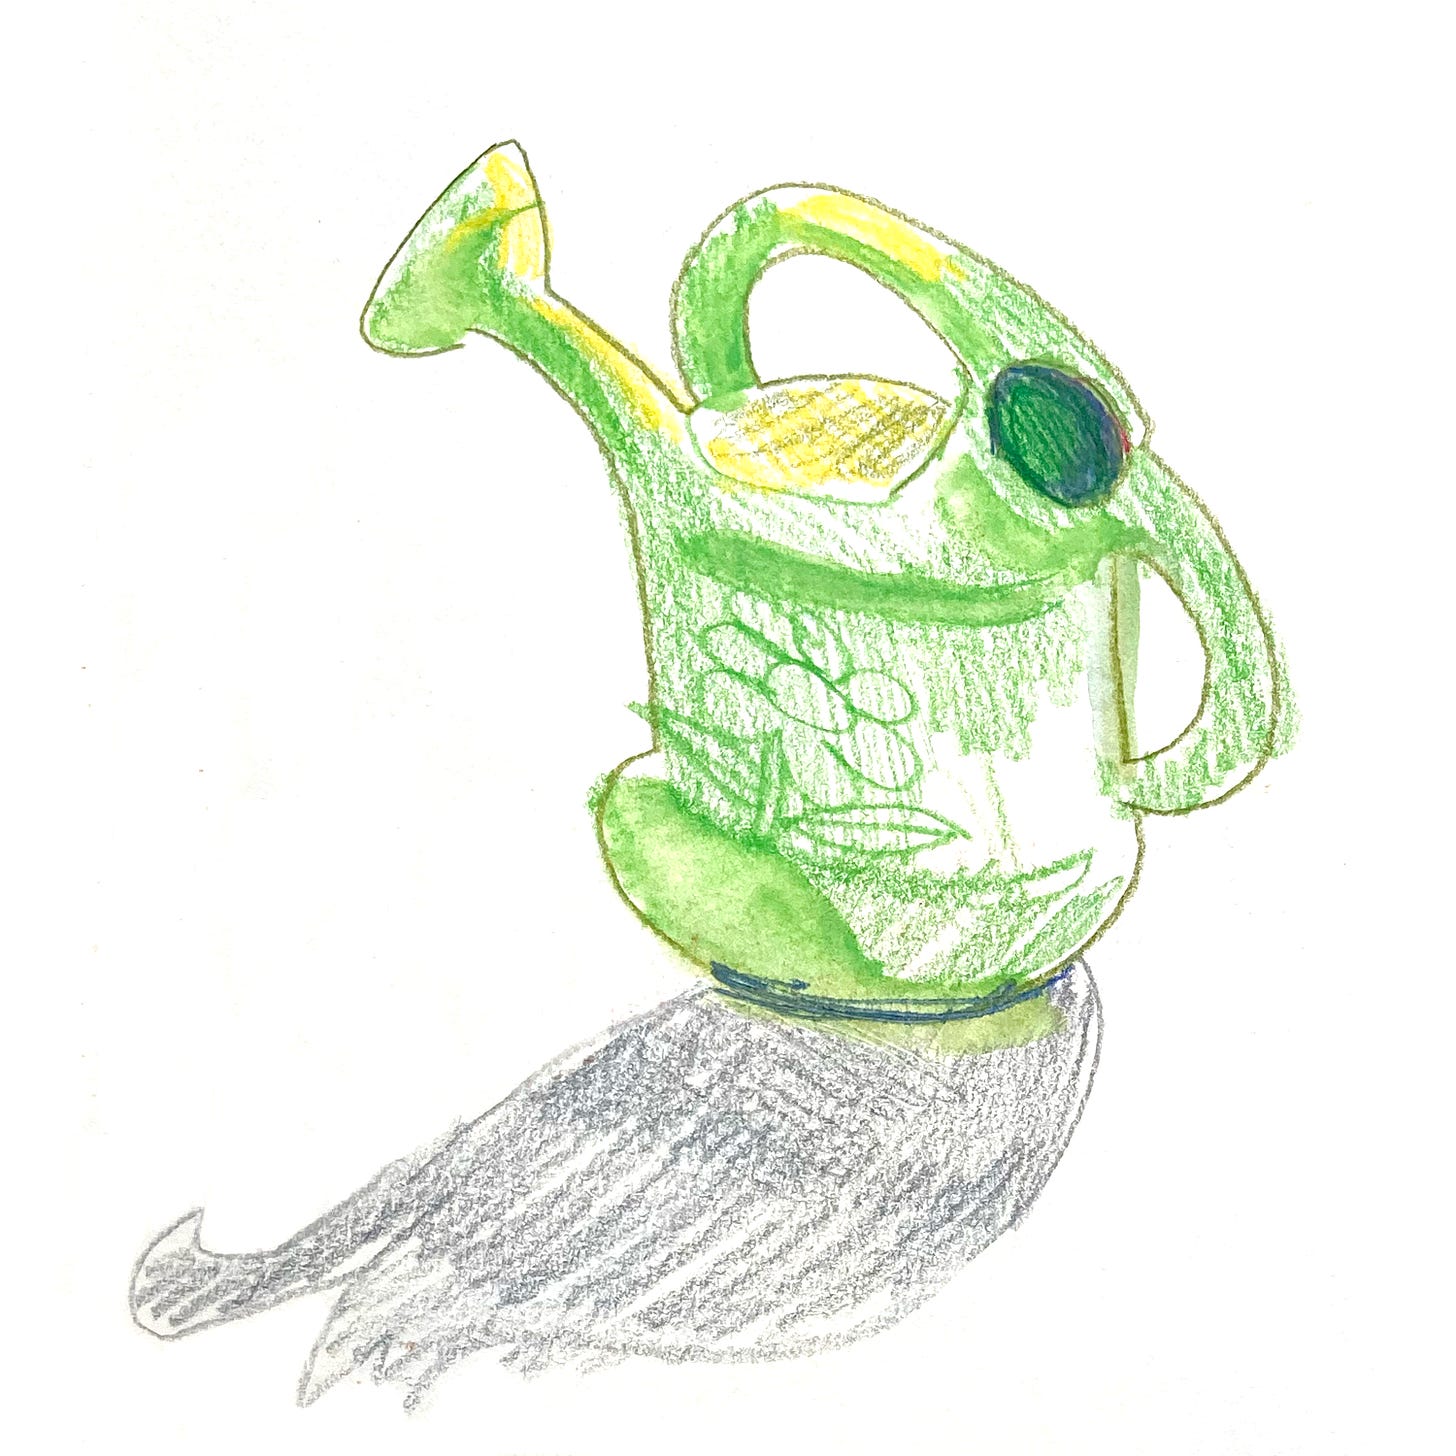 A pencil and watercolour illustration of a green plastic watering can with a long cast shadow